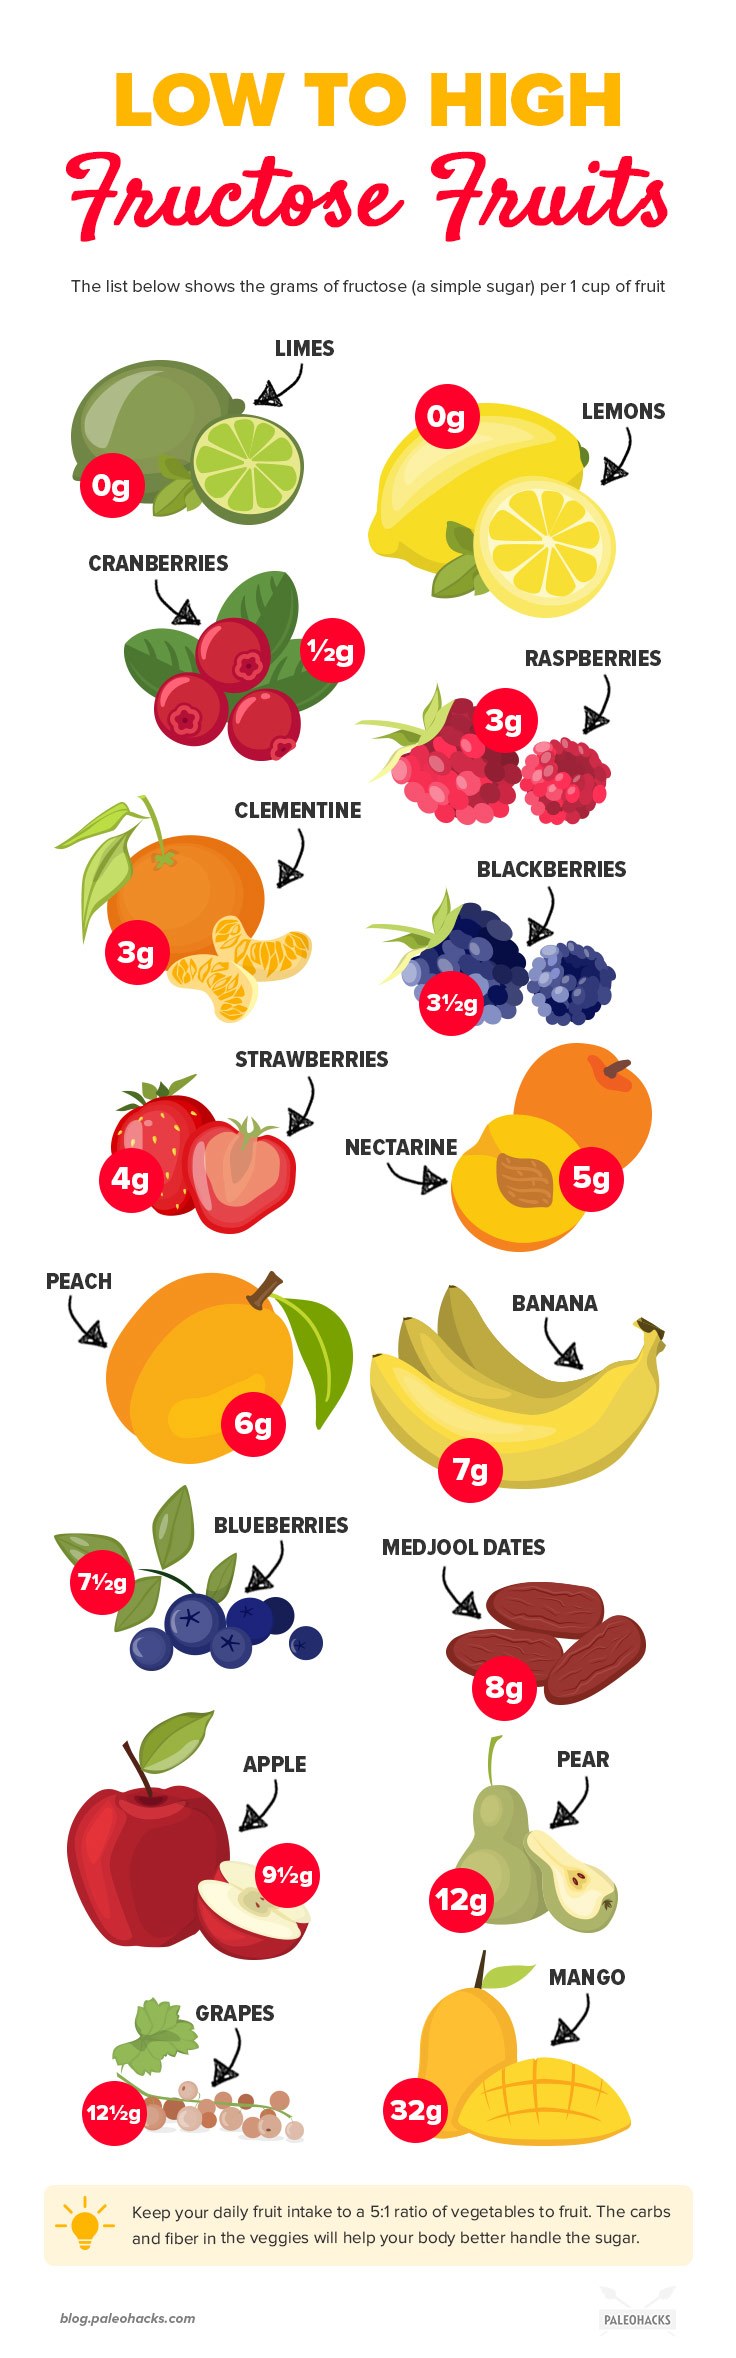 Before you enjoy a big bowl of fruit salad as your next dessert, find out which varieties are high in fructose - and why it matters.